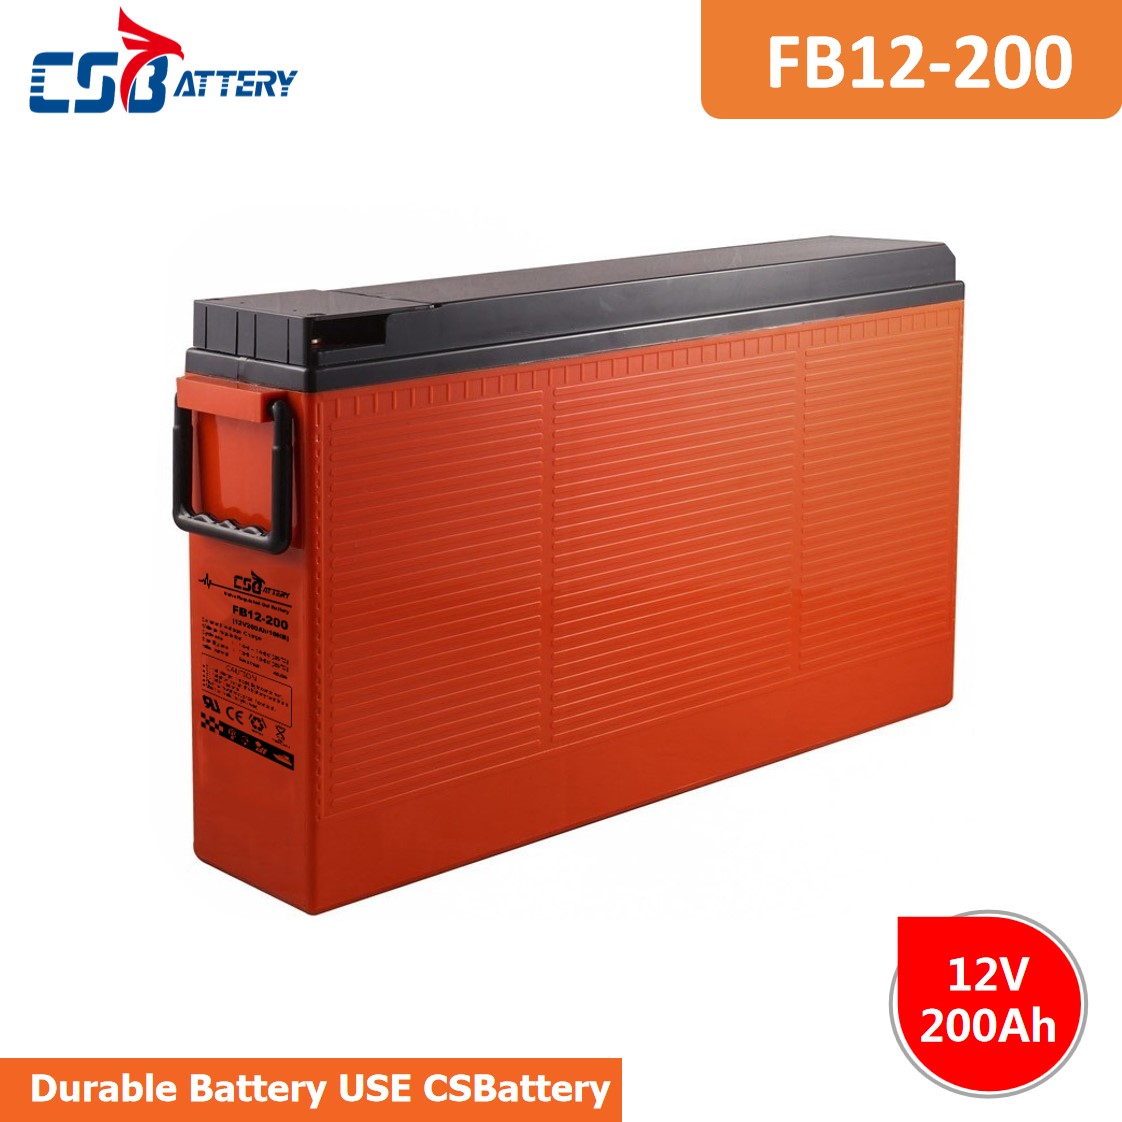 CSBattery 12V 200Ah silmFront Terminal        AGM Battery for Car/Bus/UPS/Electric-power/power-tools/Golf-car/solar-storage 							